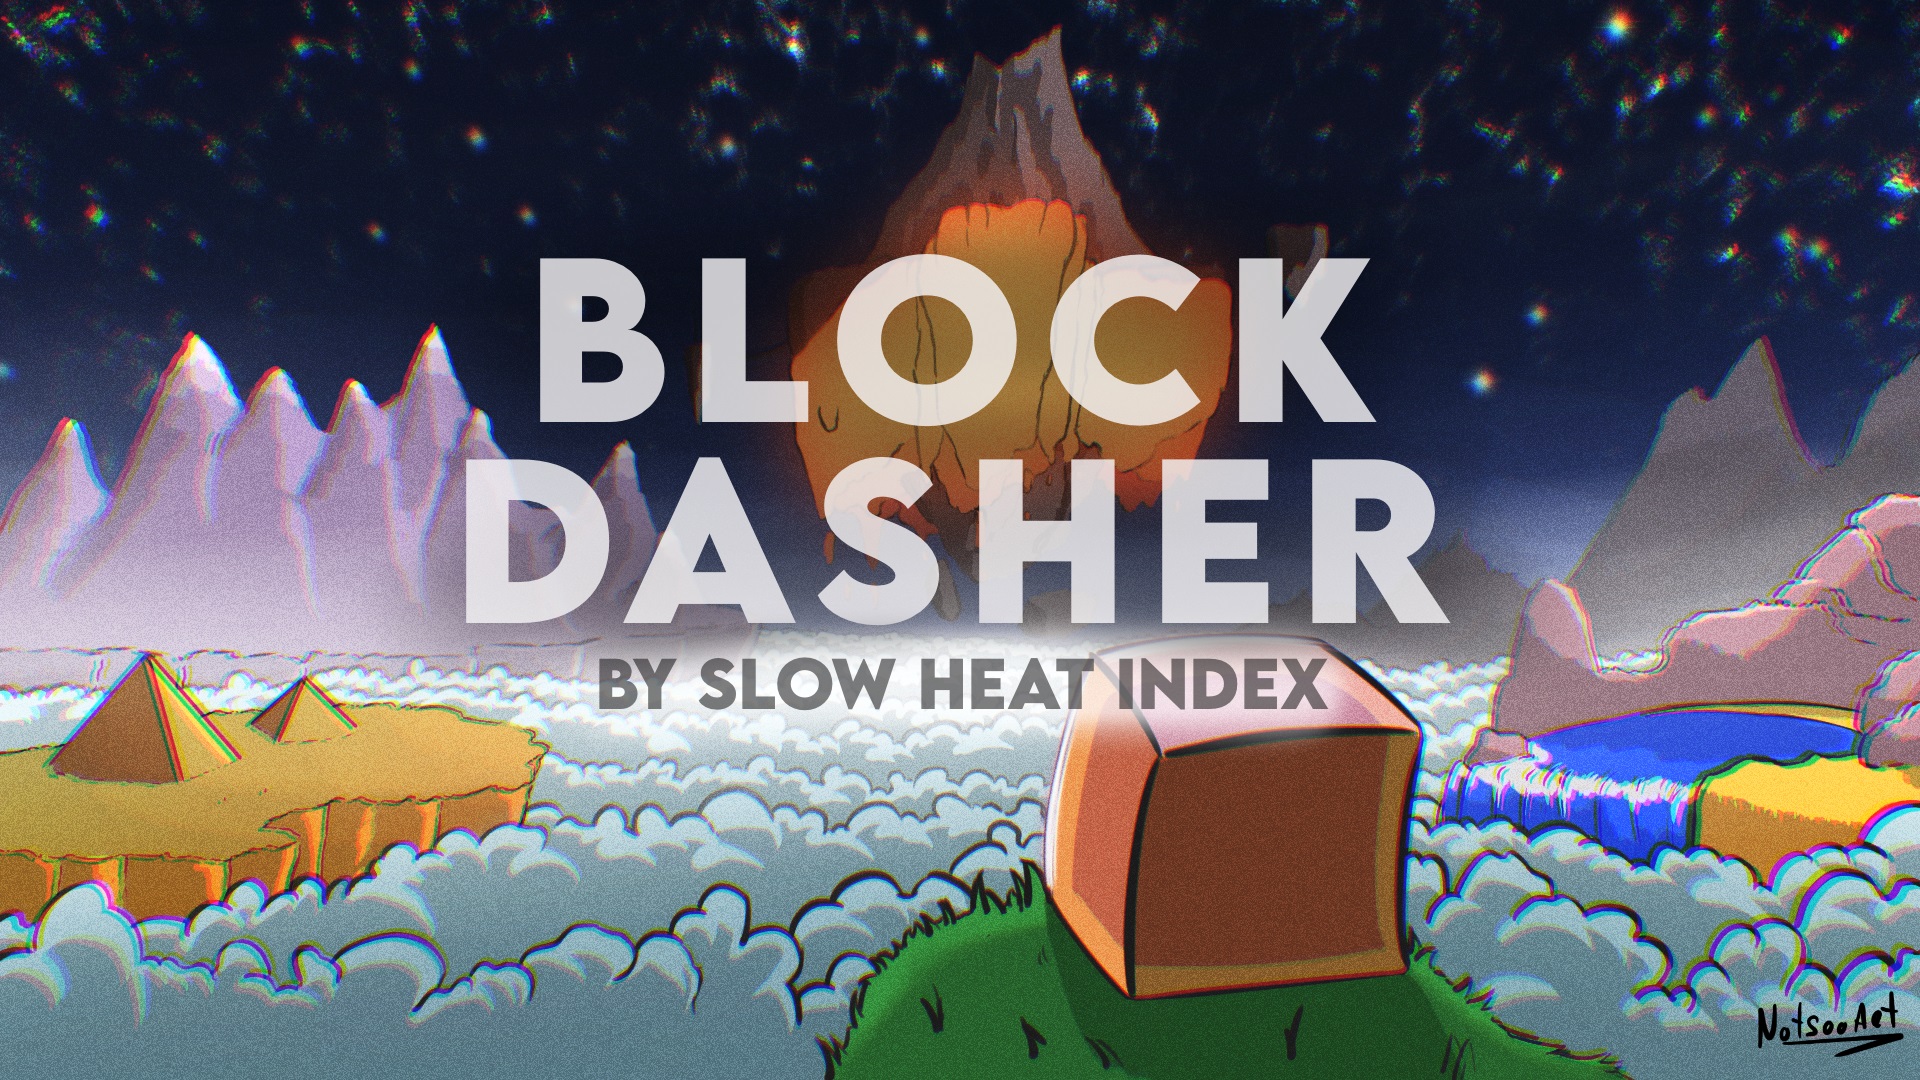 New Event: 'Block Dash Endless' and a free Legedary 'Block Dasher